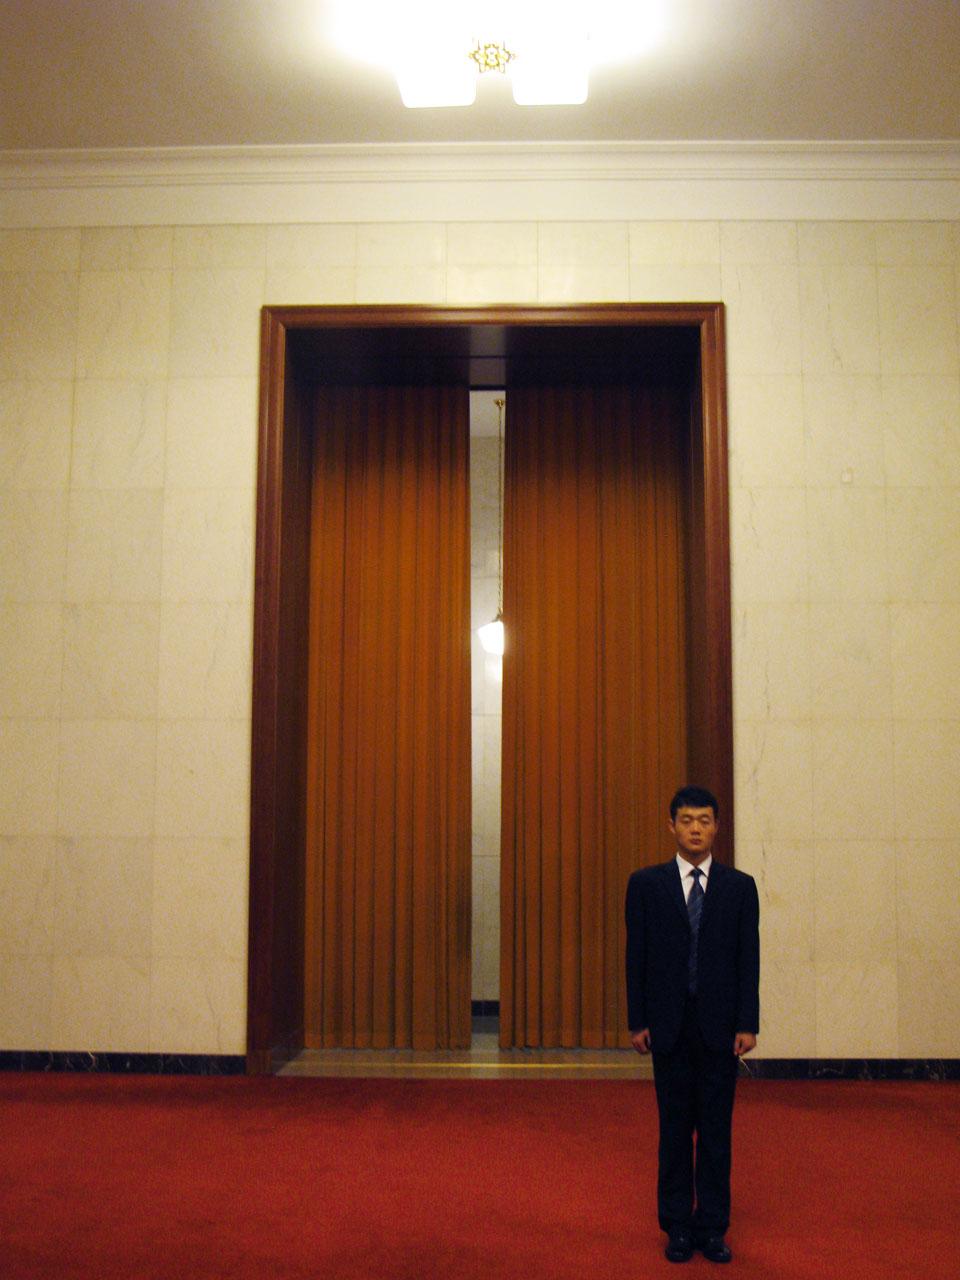 The Great Hall of the People. Photo by Nelly Ben Hayoun.